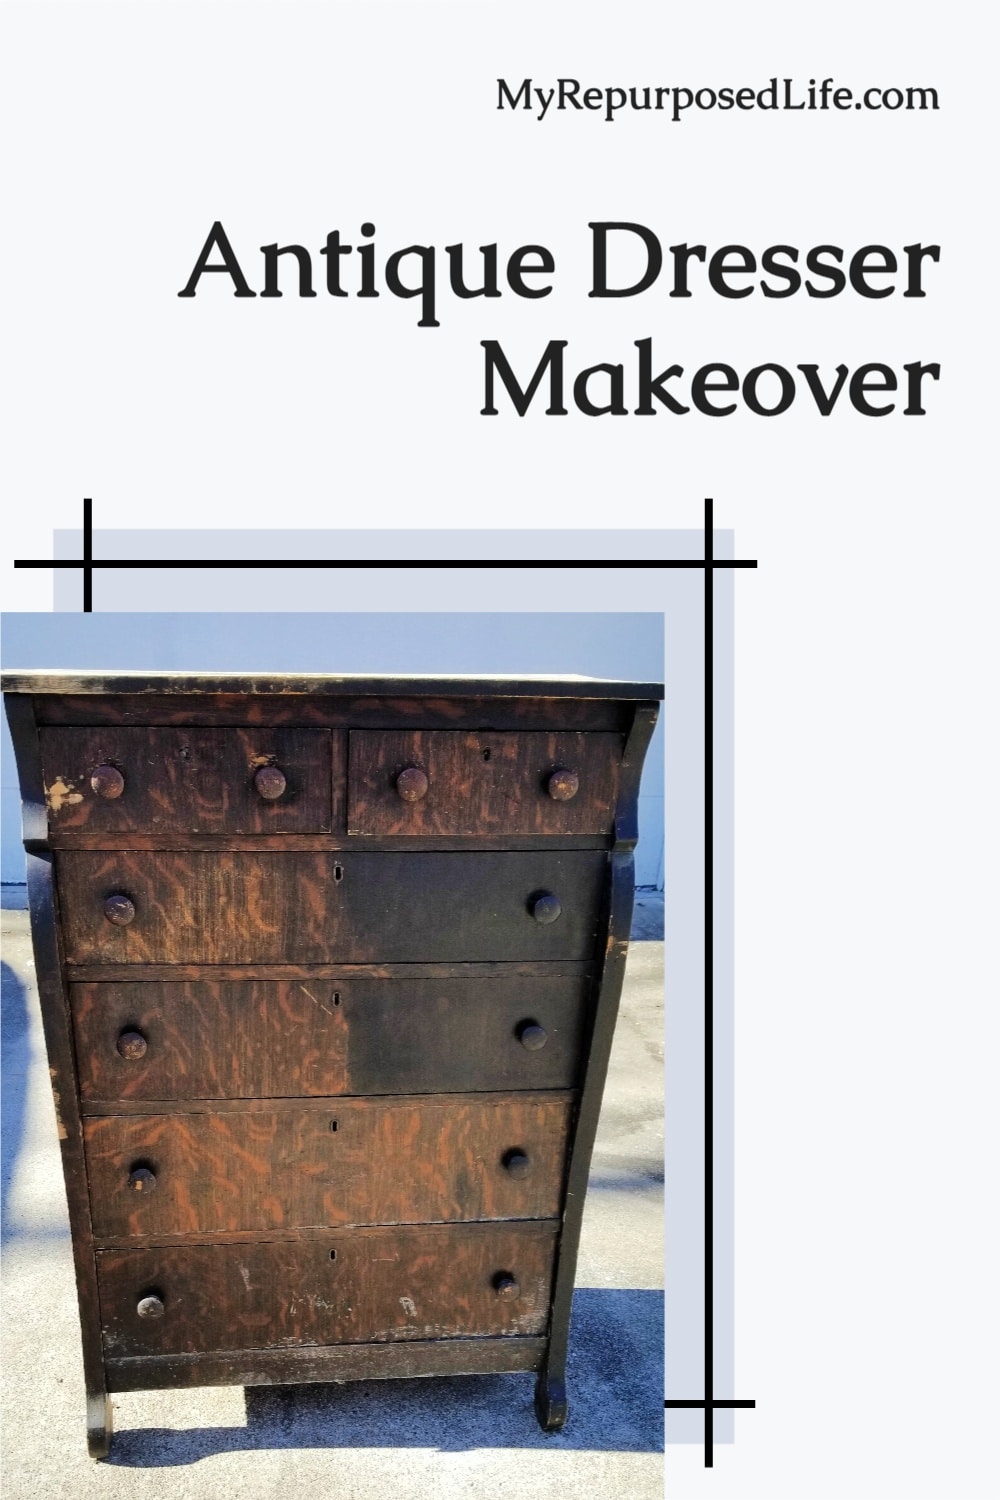 This free chest of drawers gets a new lease on life with a few repairs and some paint. Using a paint sprayer makes this a quick and easy furniture flip! #MyRepurposedLife #furniture #makeover #dresser #diy #paintsprayer #easy #project #furnitureflip via @repurposedlife